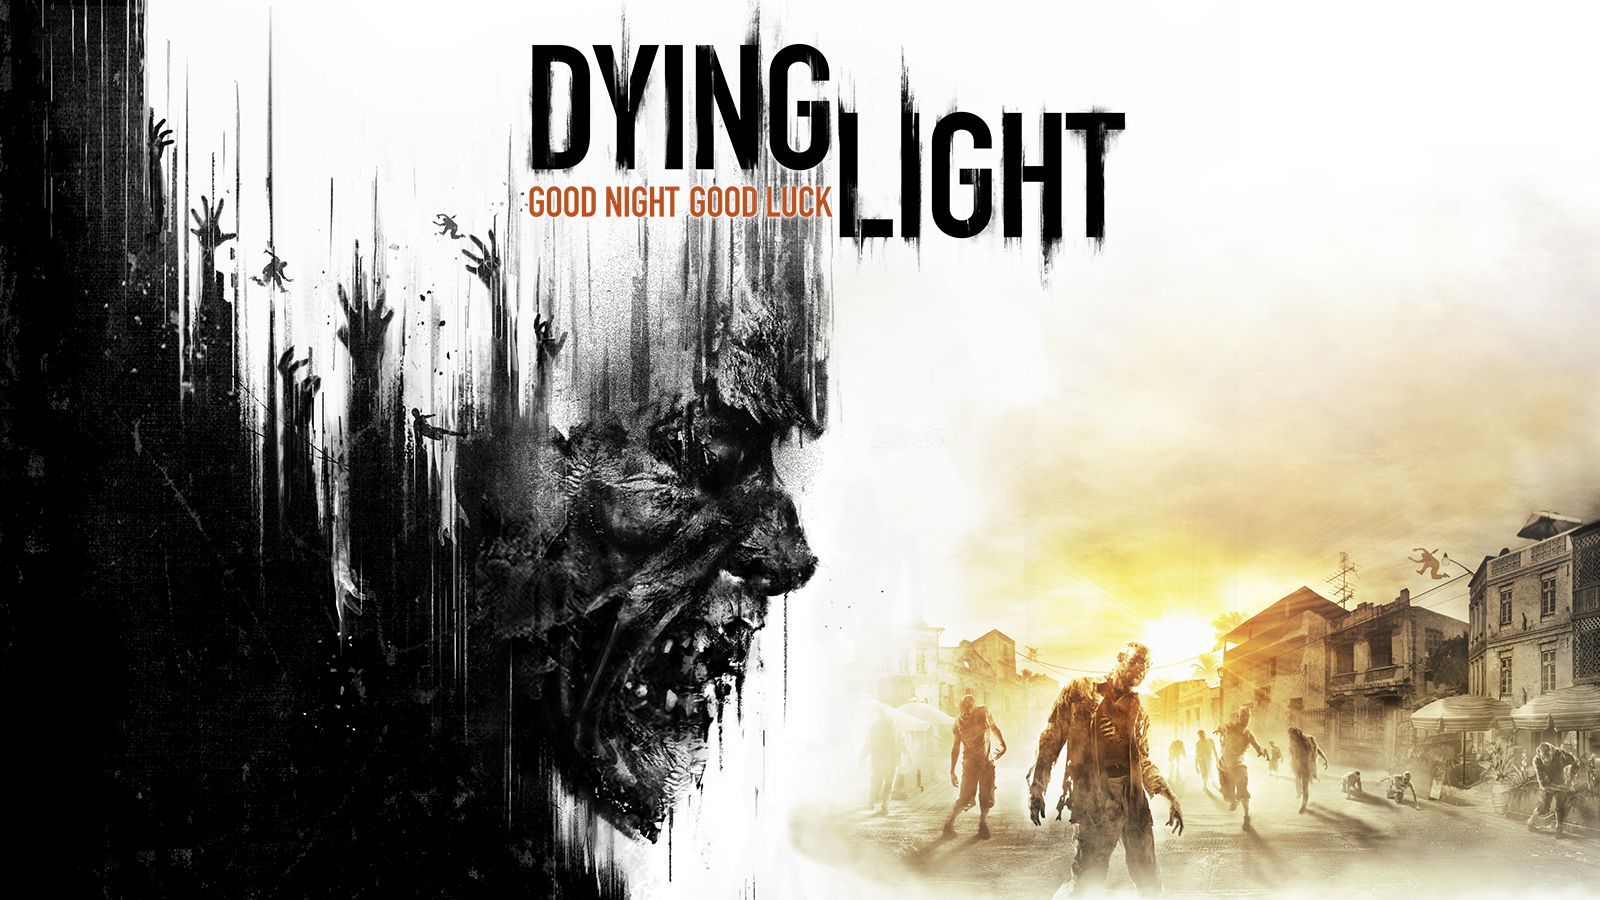 Dying Light iPhone Wallpaper Free Dying Light iPhone